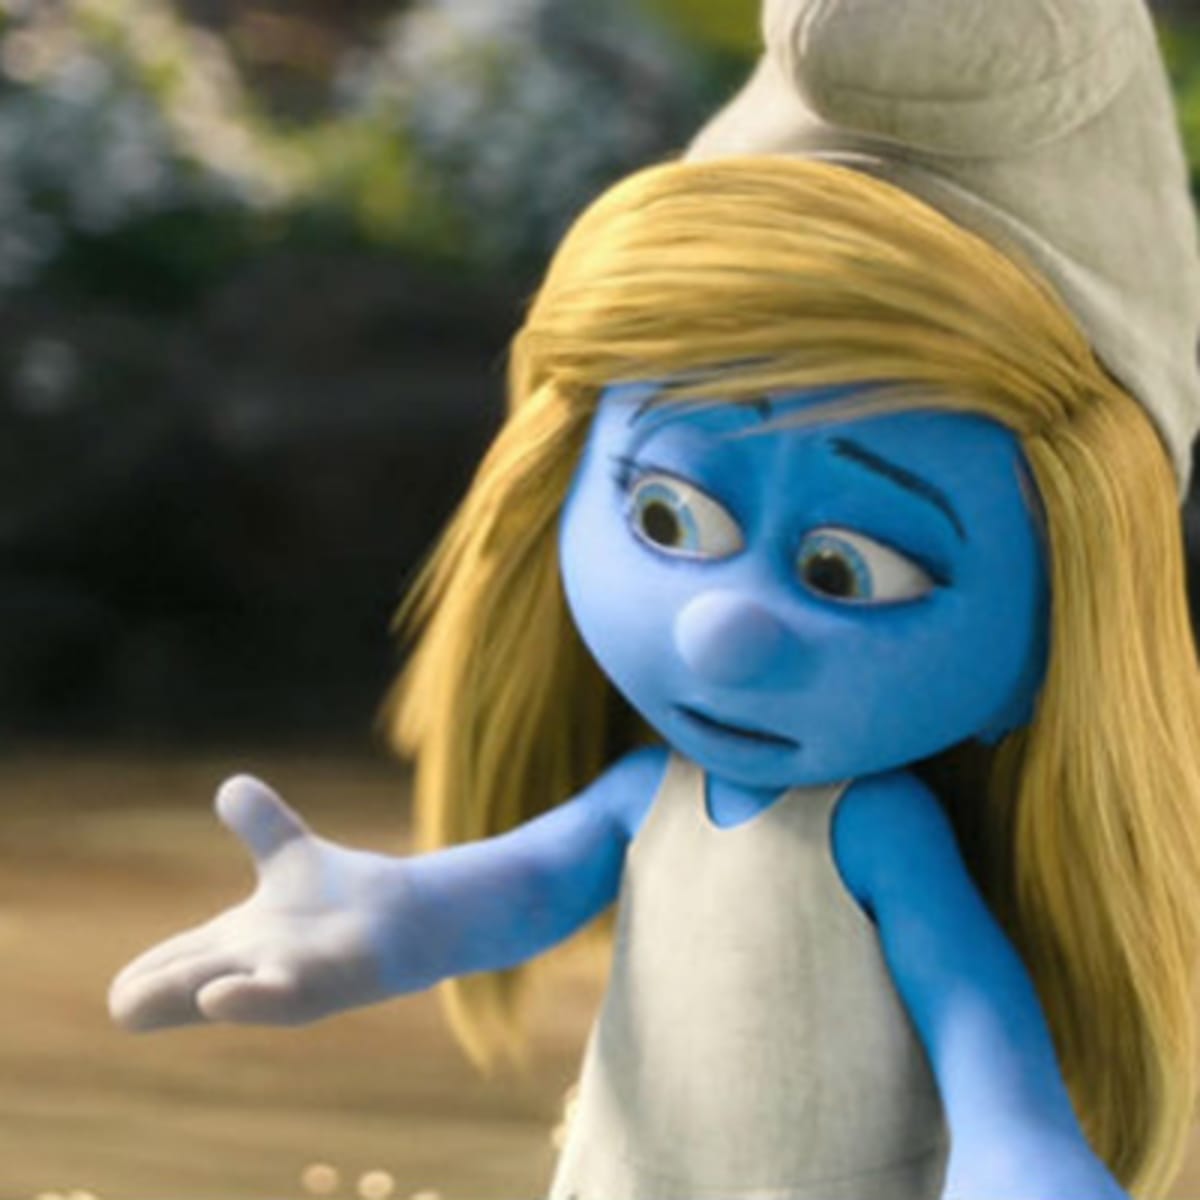 The Banal, Insidious Sexism of Smurfette - Pacific Standard